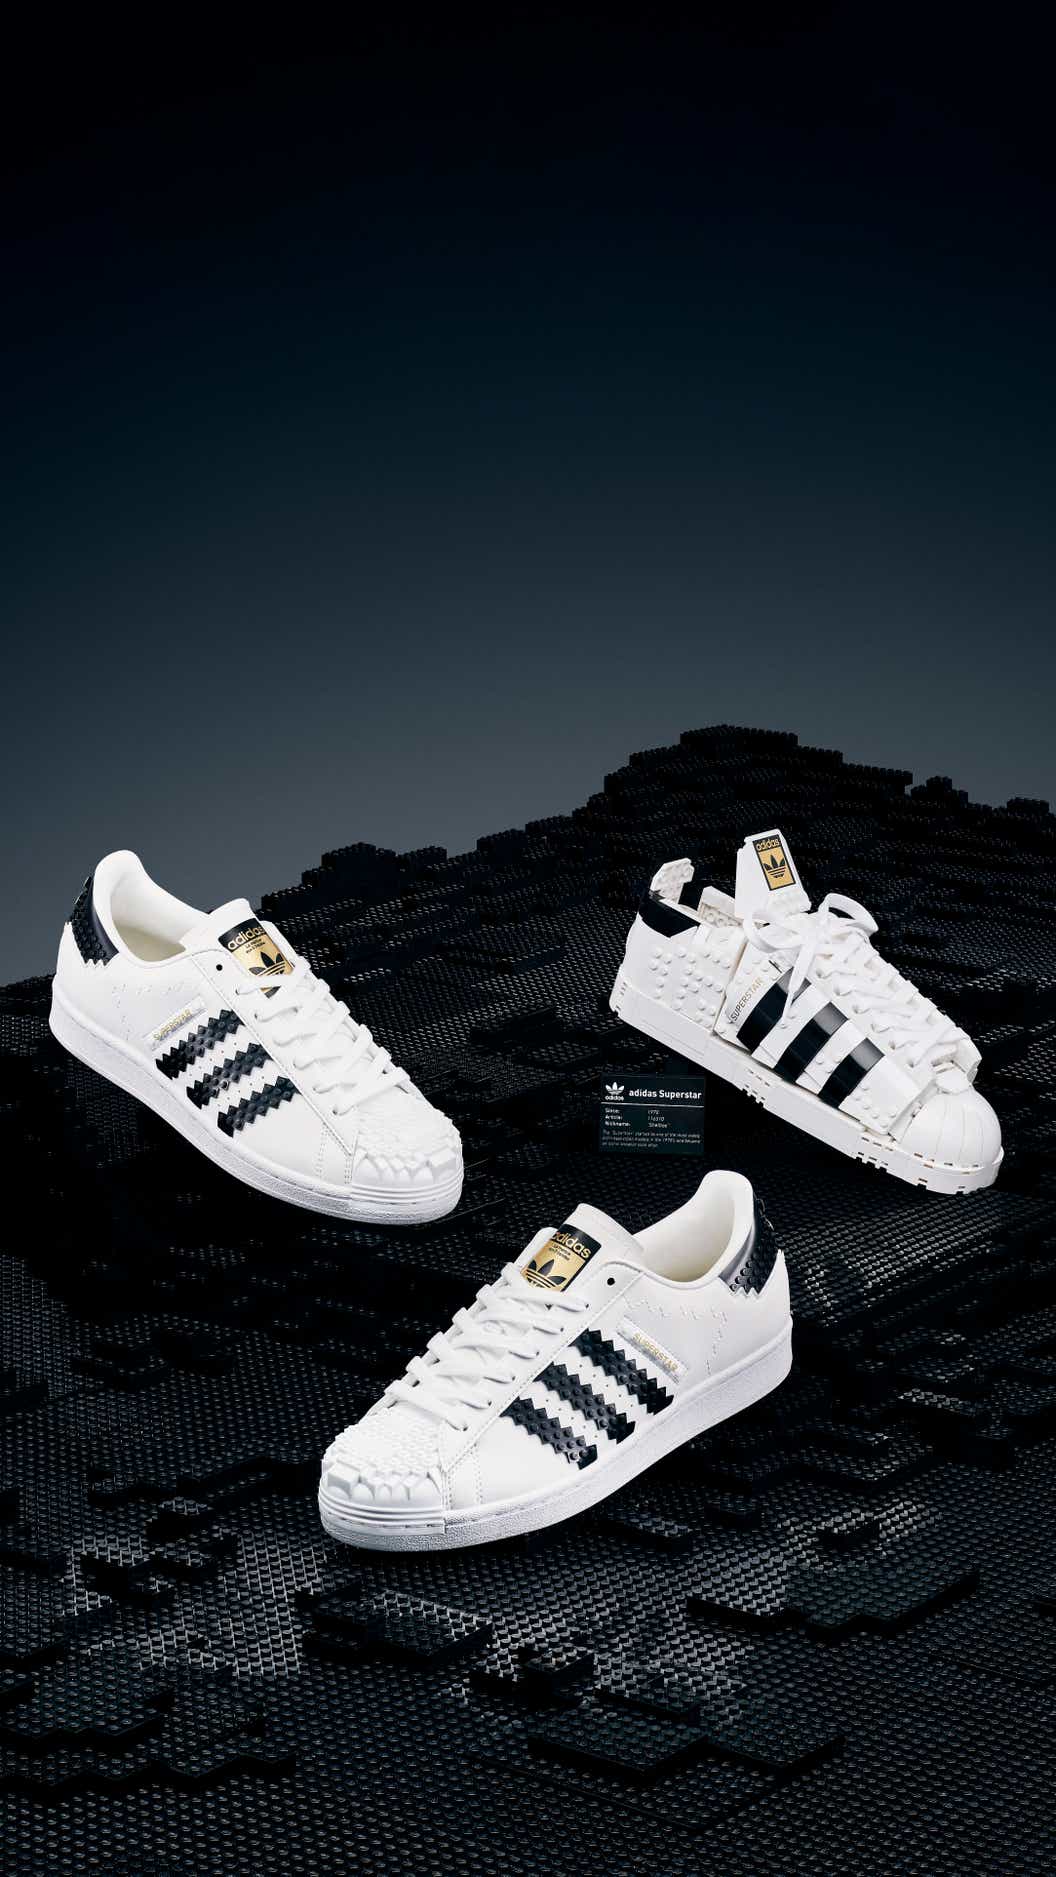 Adidas Originals And The Lego Group Launch Collaborative Superstar Sneaker And Surprising Lego Edition Of The Sneaker Icon About Us Lego Com Us